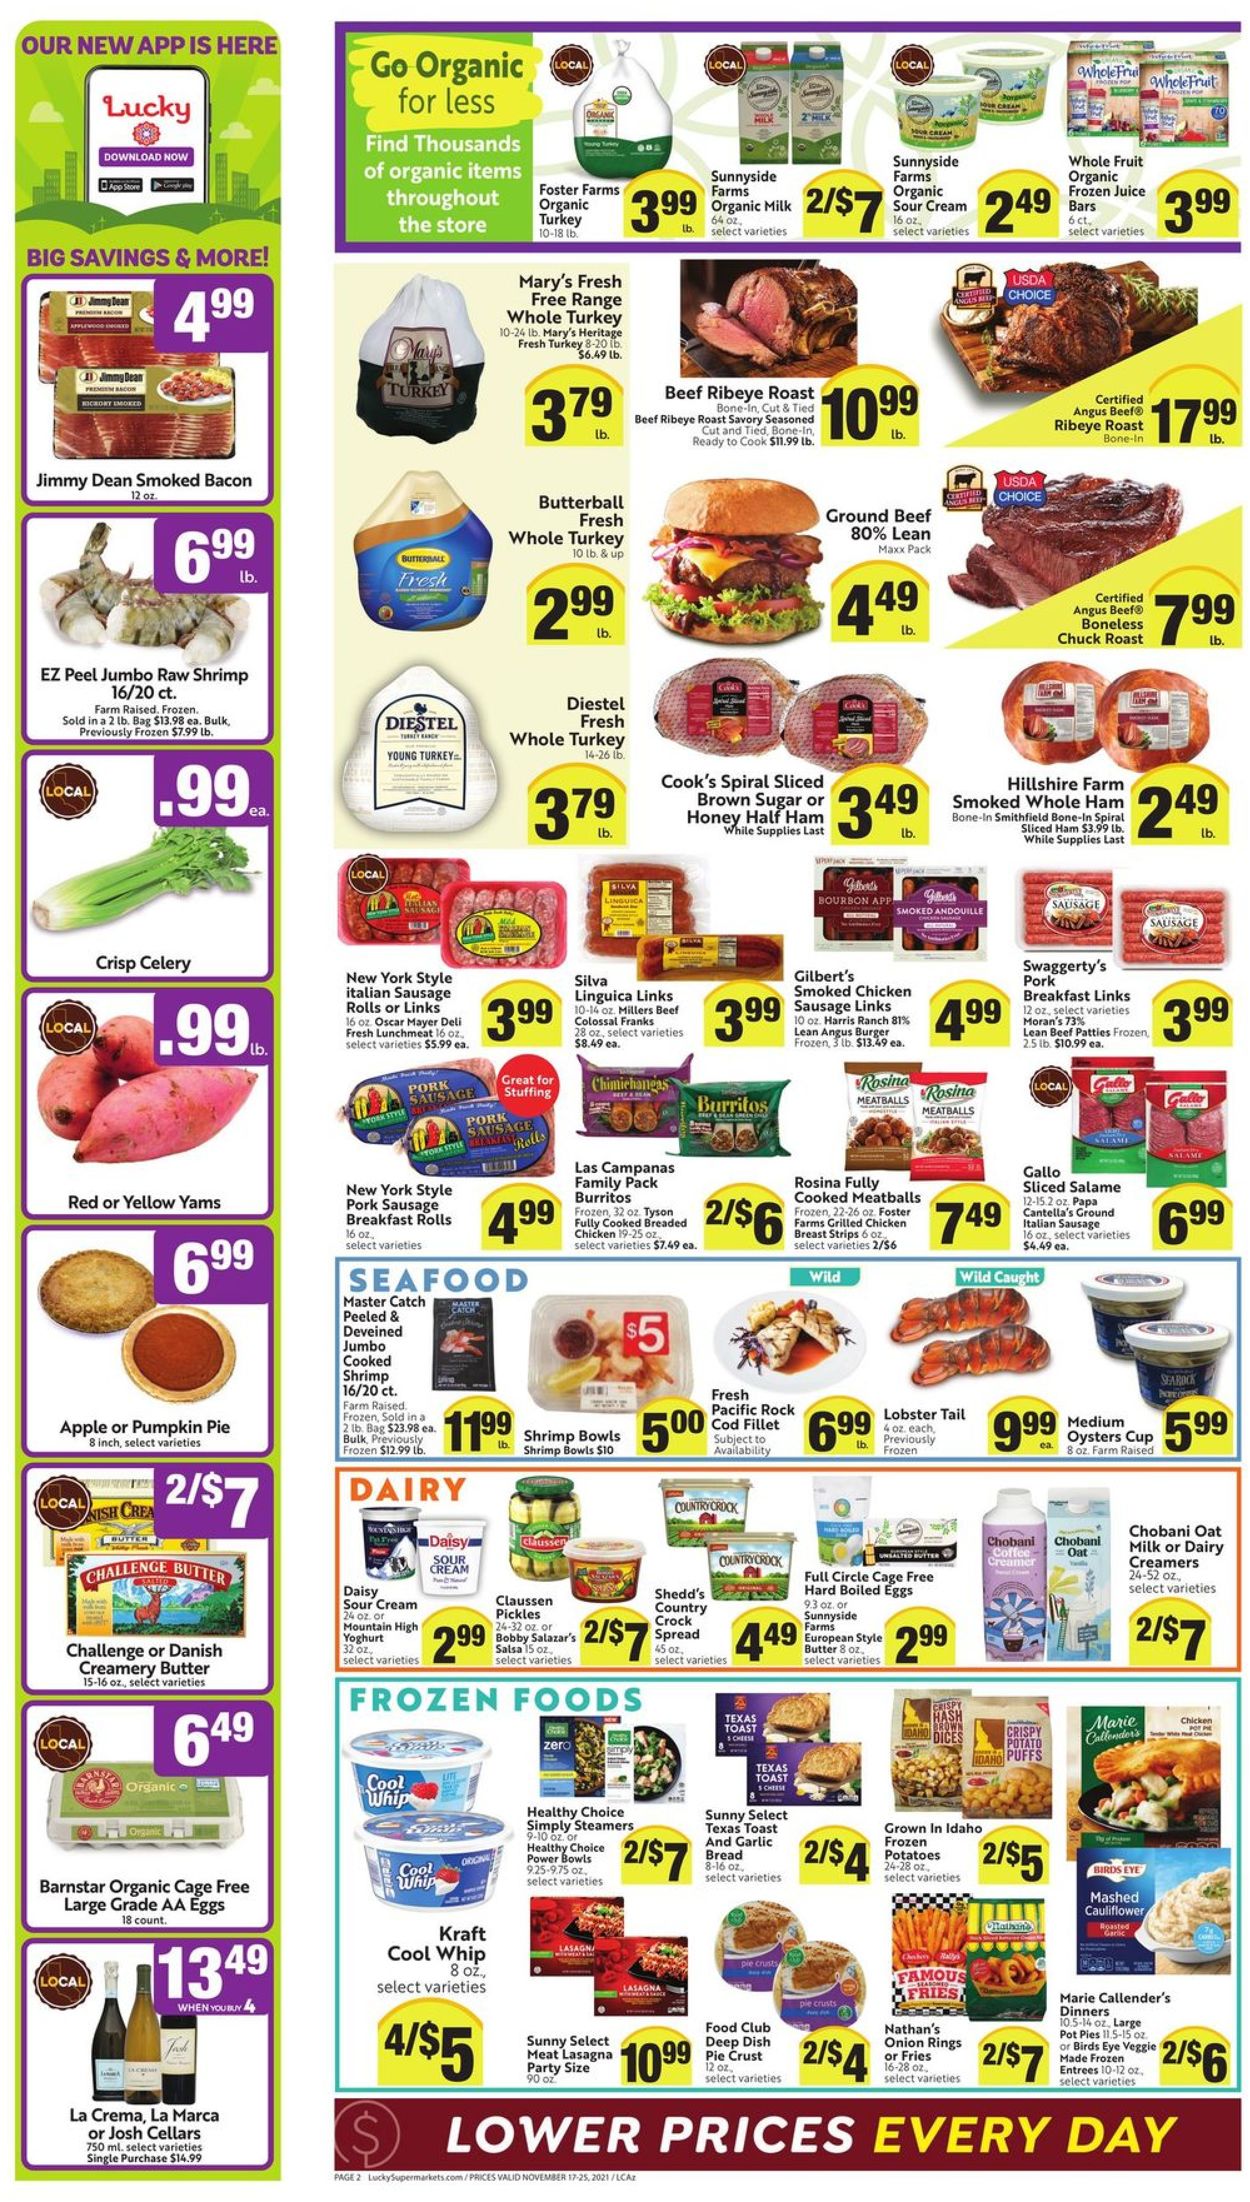 Lucky Supermarkets THANKSGIVING 2021 Weekly Ad Circular - valid 11/17-11/25/2021 (Page 2)